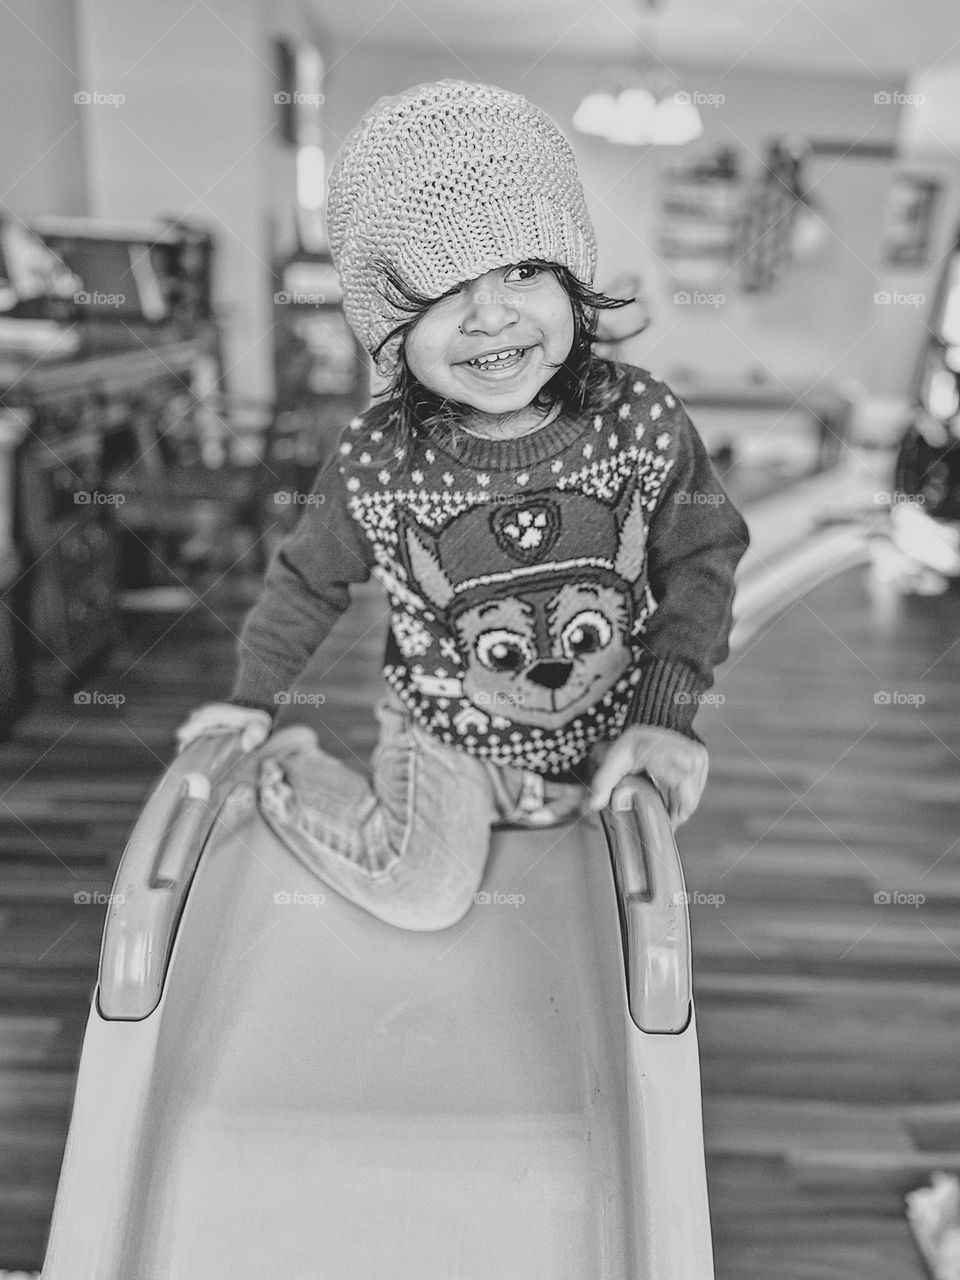 Toddler girl goes down indoor slide, winter time indoor fun, physical activity indoors during the winter, cute toddler smiling, keep one eye open, sliding indoors, having fun on a slide, toddler playing with slide, monochrome portrait of a child